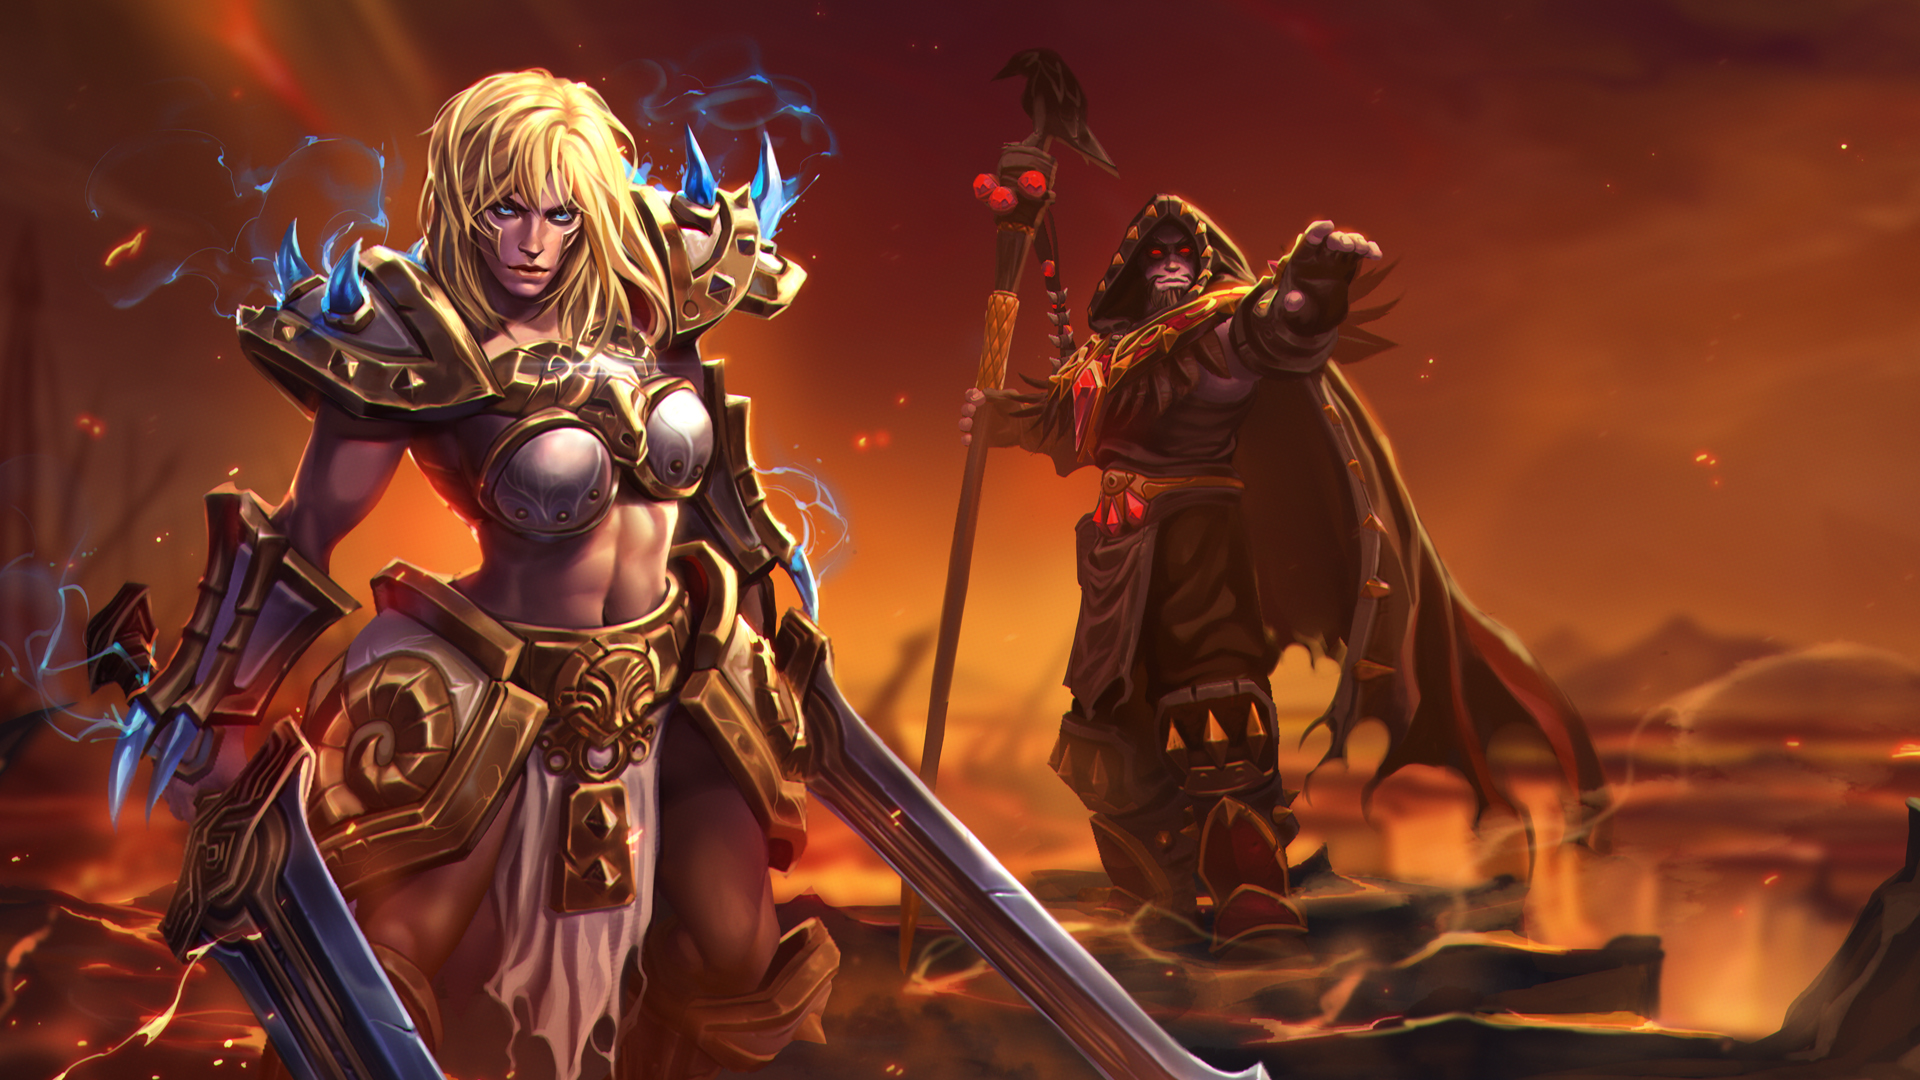 sonya, Belly, Blonde, Long hair, Blizzard Entertainment, Video games, Heroes of the storm, Warcraft, World of Warcraft, Medivh, Sword Wallpaper